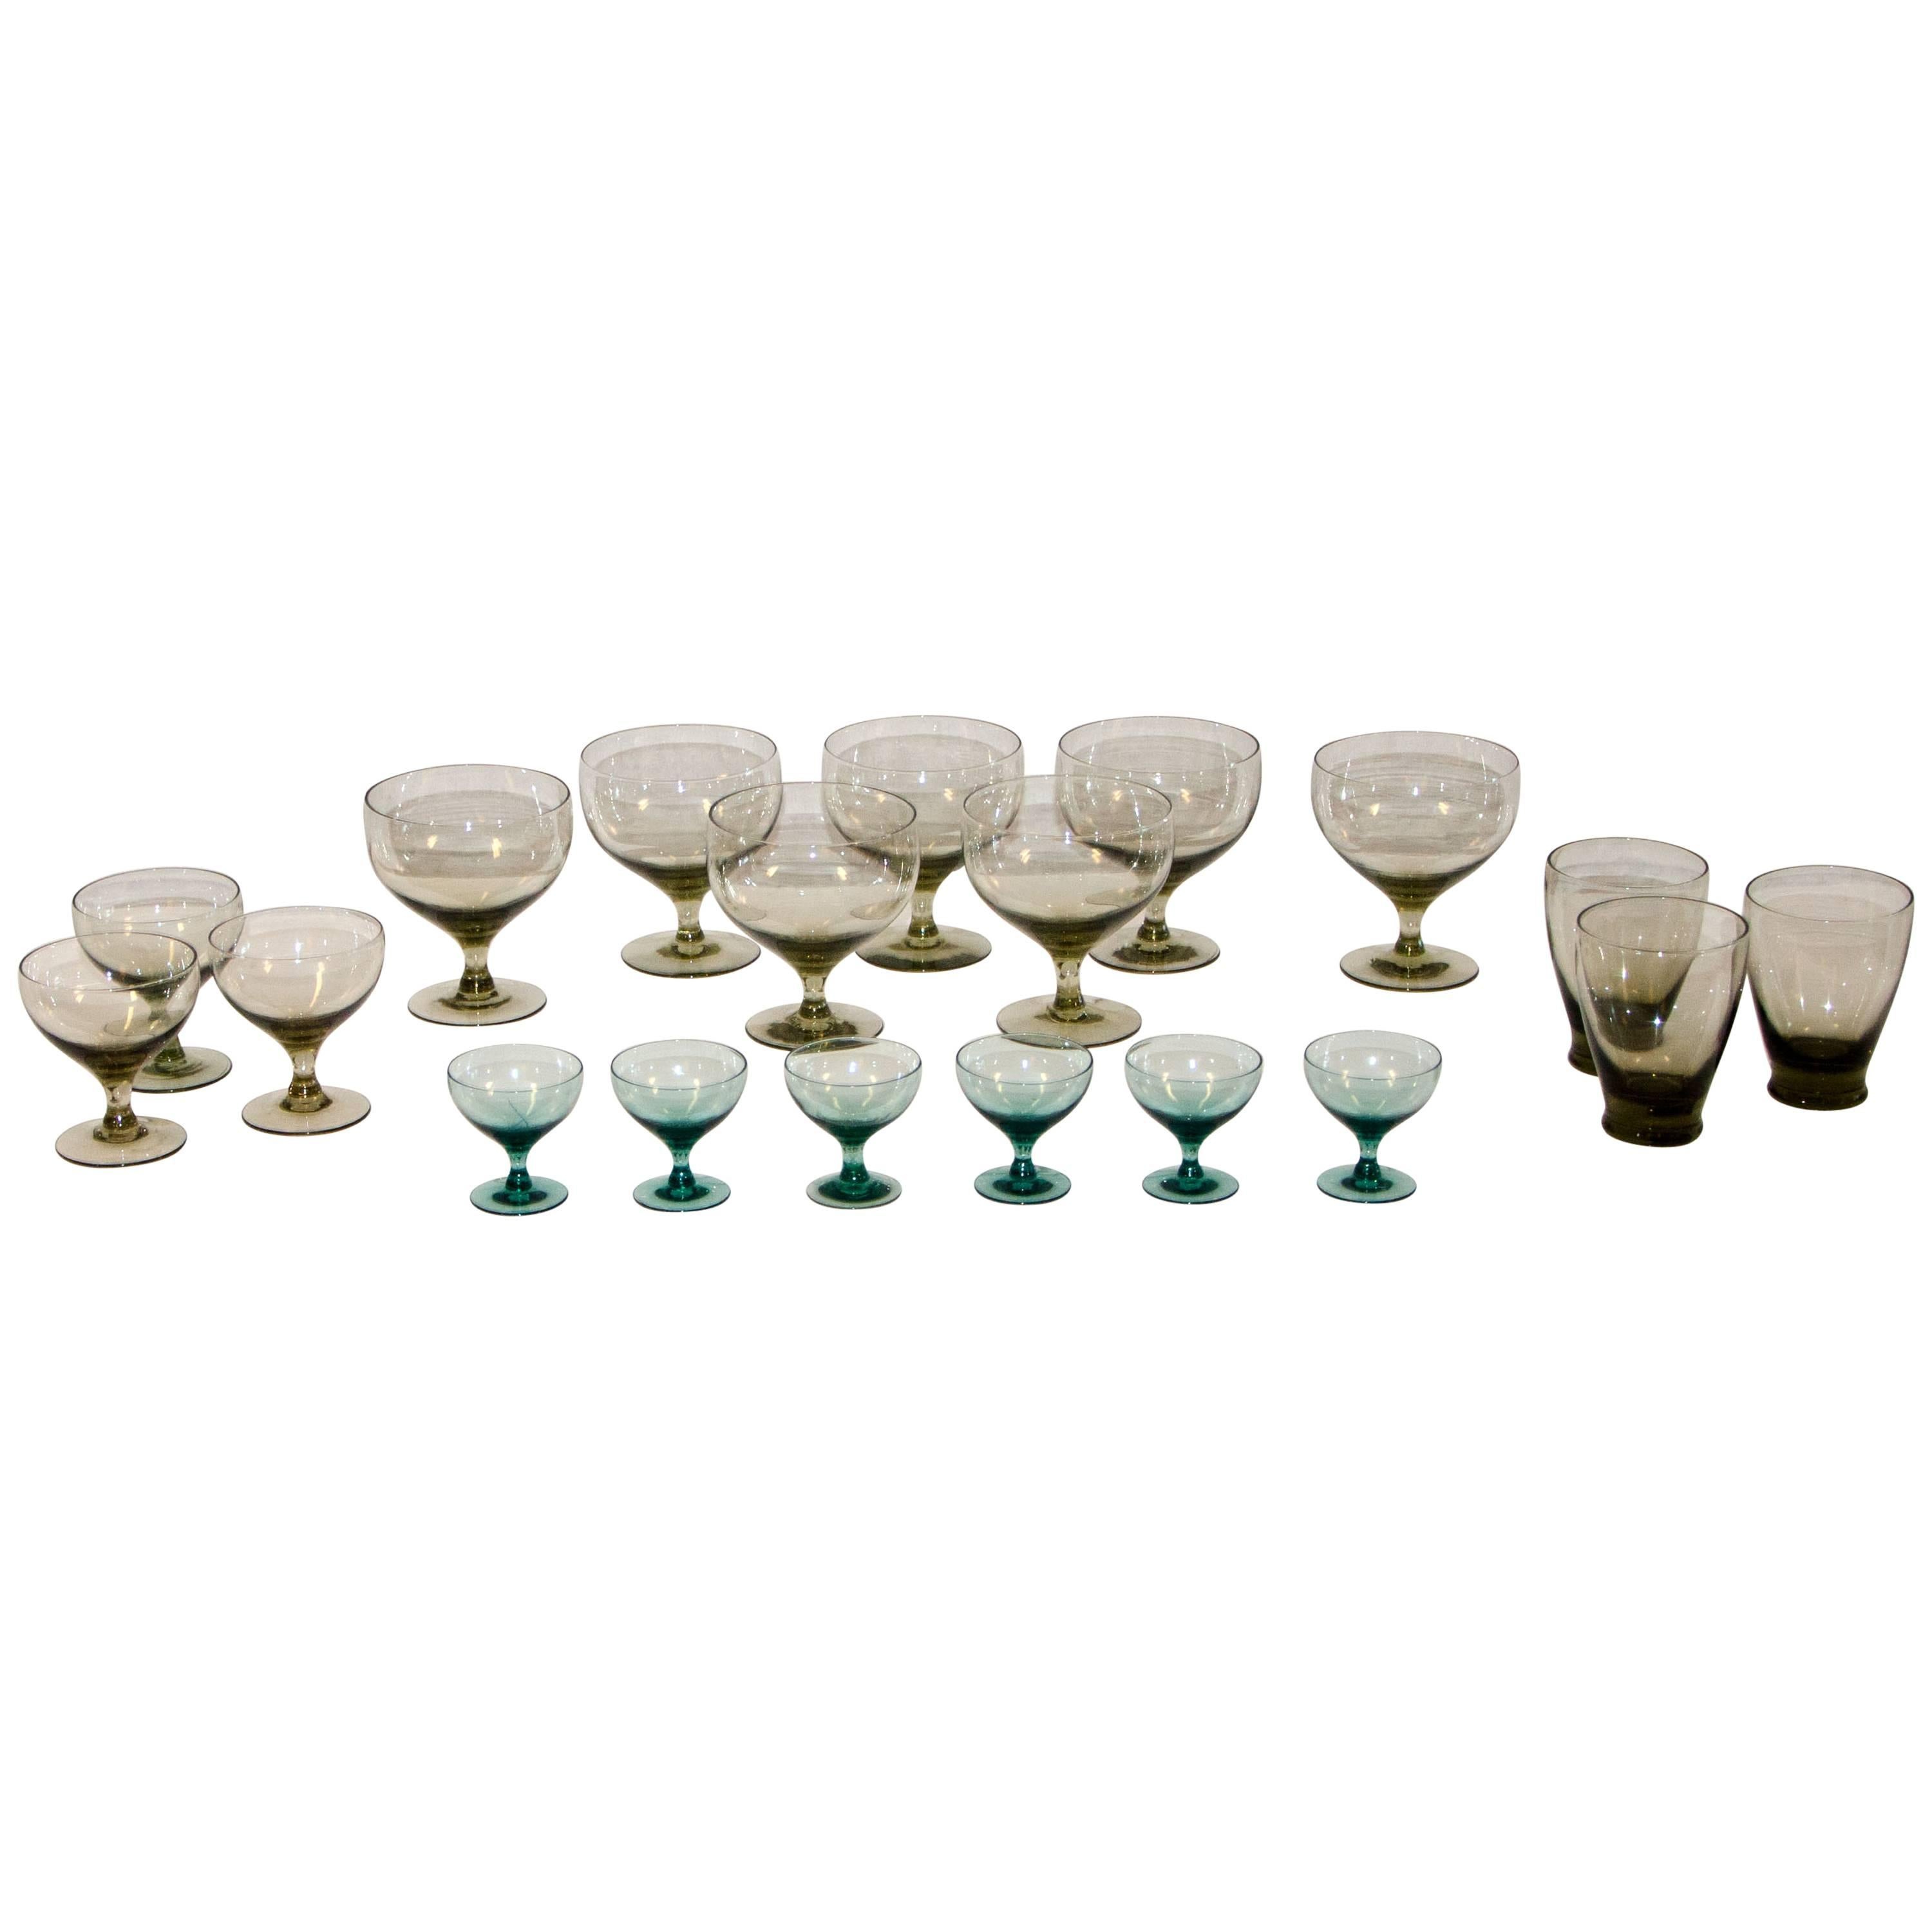 Collection of Morgantown American Modern Glassware by Russel Wright